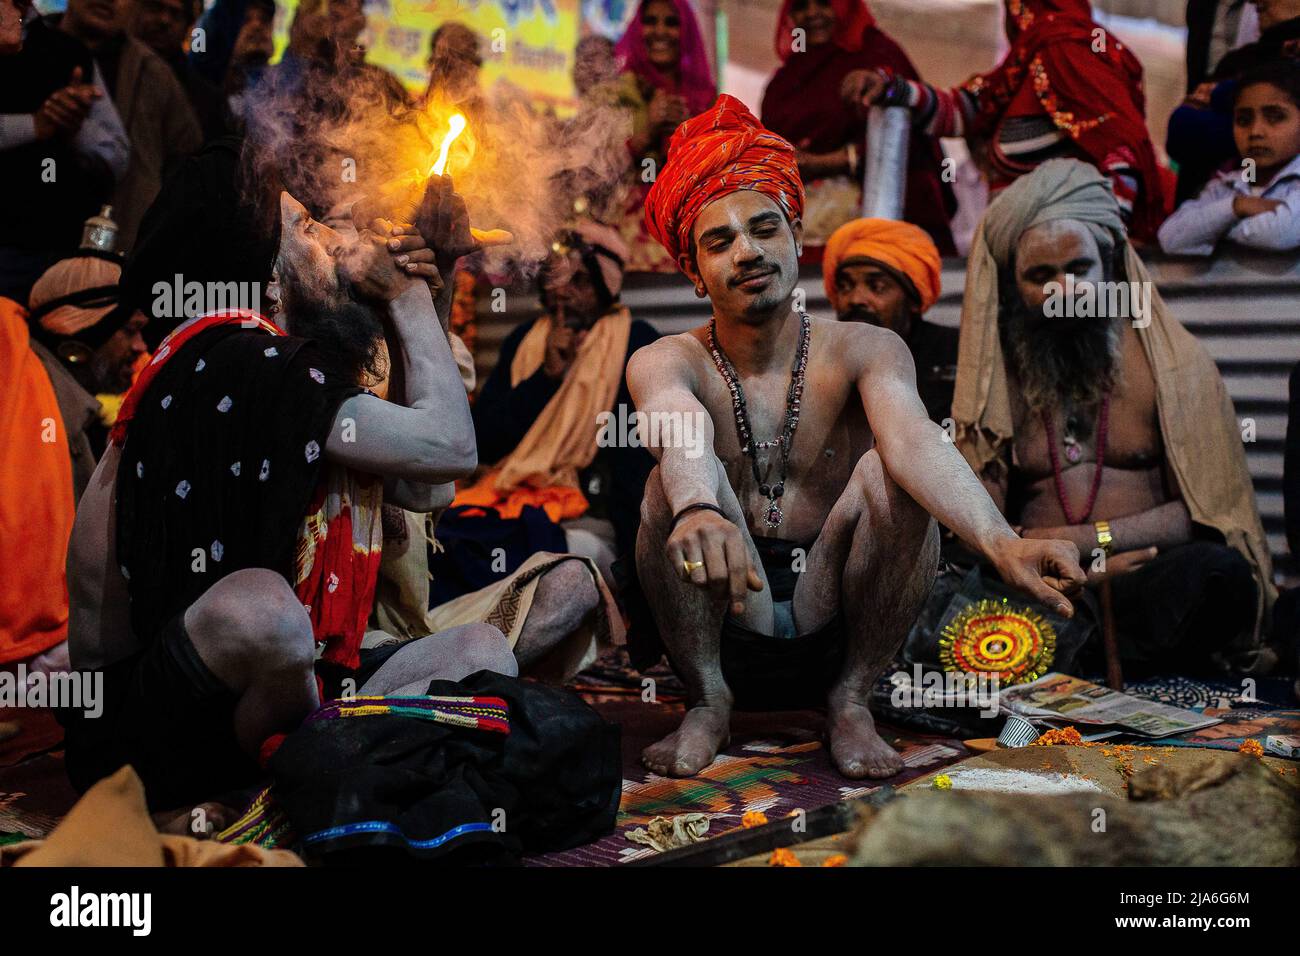 A sadhu smokes a chillum containing cannabinoids during a gathering of holy men. Every twelve years, millions of Hindu devotees begin a massive pilgrimage to the most sacred of Indian festivals: the Kumbha Mela, which takes place in Prayagraj, a place considered particularly auspicious because it is at the confluence of the Ganges, Yamuna and the mythical Saraswati. It is estimated that in 2019, 120 million people attended the sacred enclosure over the course of a month and a half. These numbers, equivalent to the total population of Japan, and 40 times the number of pilgrims who visit Mecca i Stock Photo